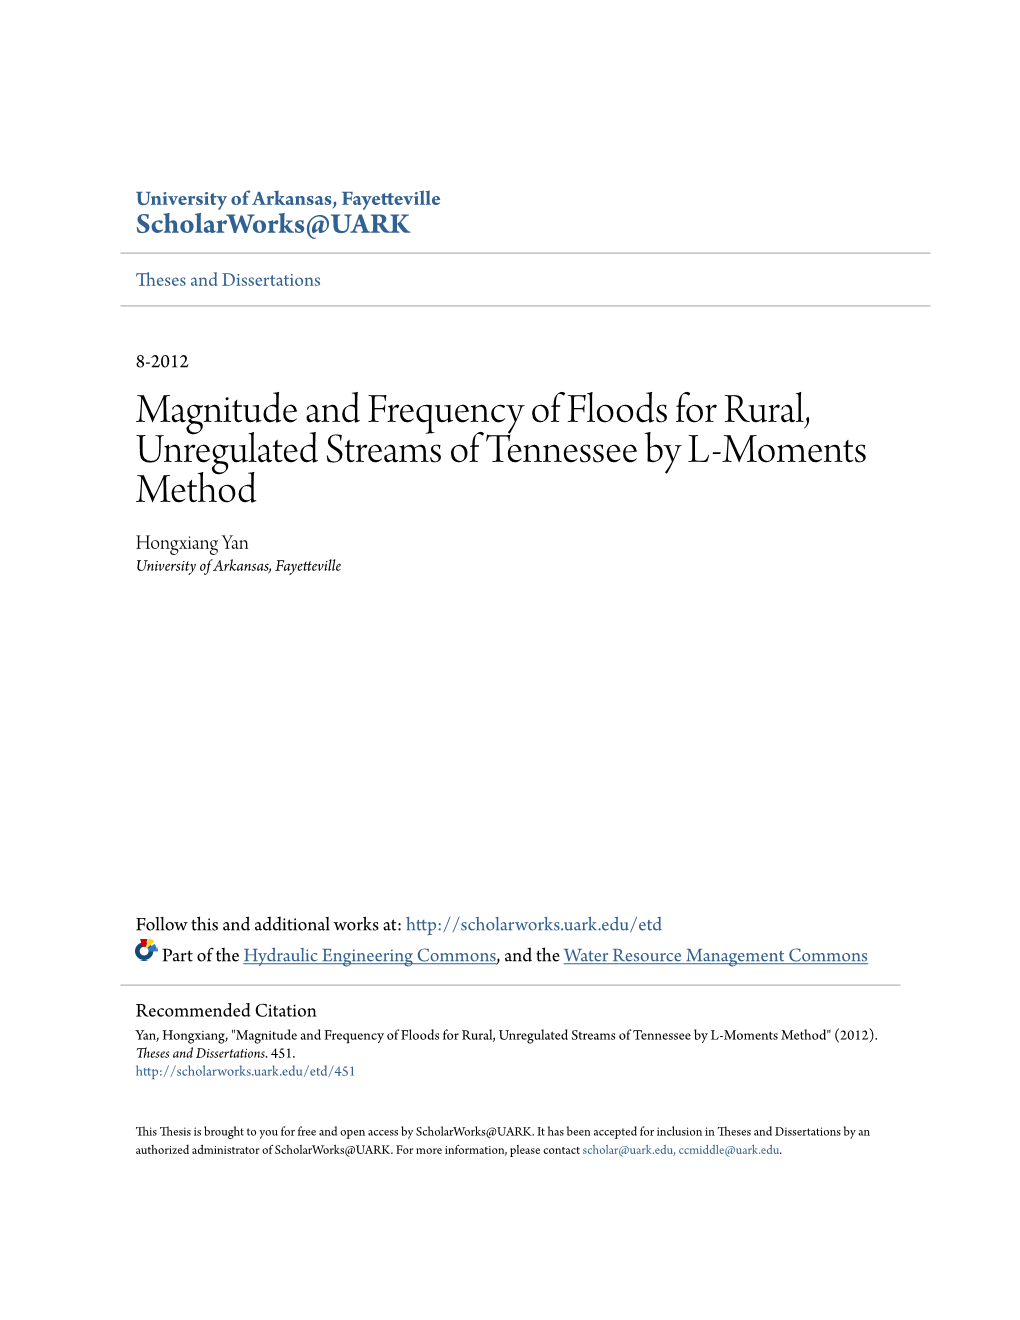 Magnitude and Frequency of Floods for Rural, Unregulated Streams of Tennessee by L-Moments Method Hongxiang Yan University of Arkansas, Fayetteville